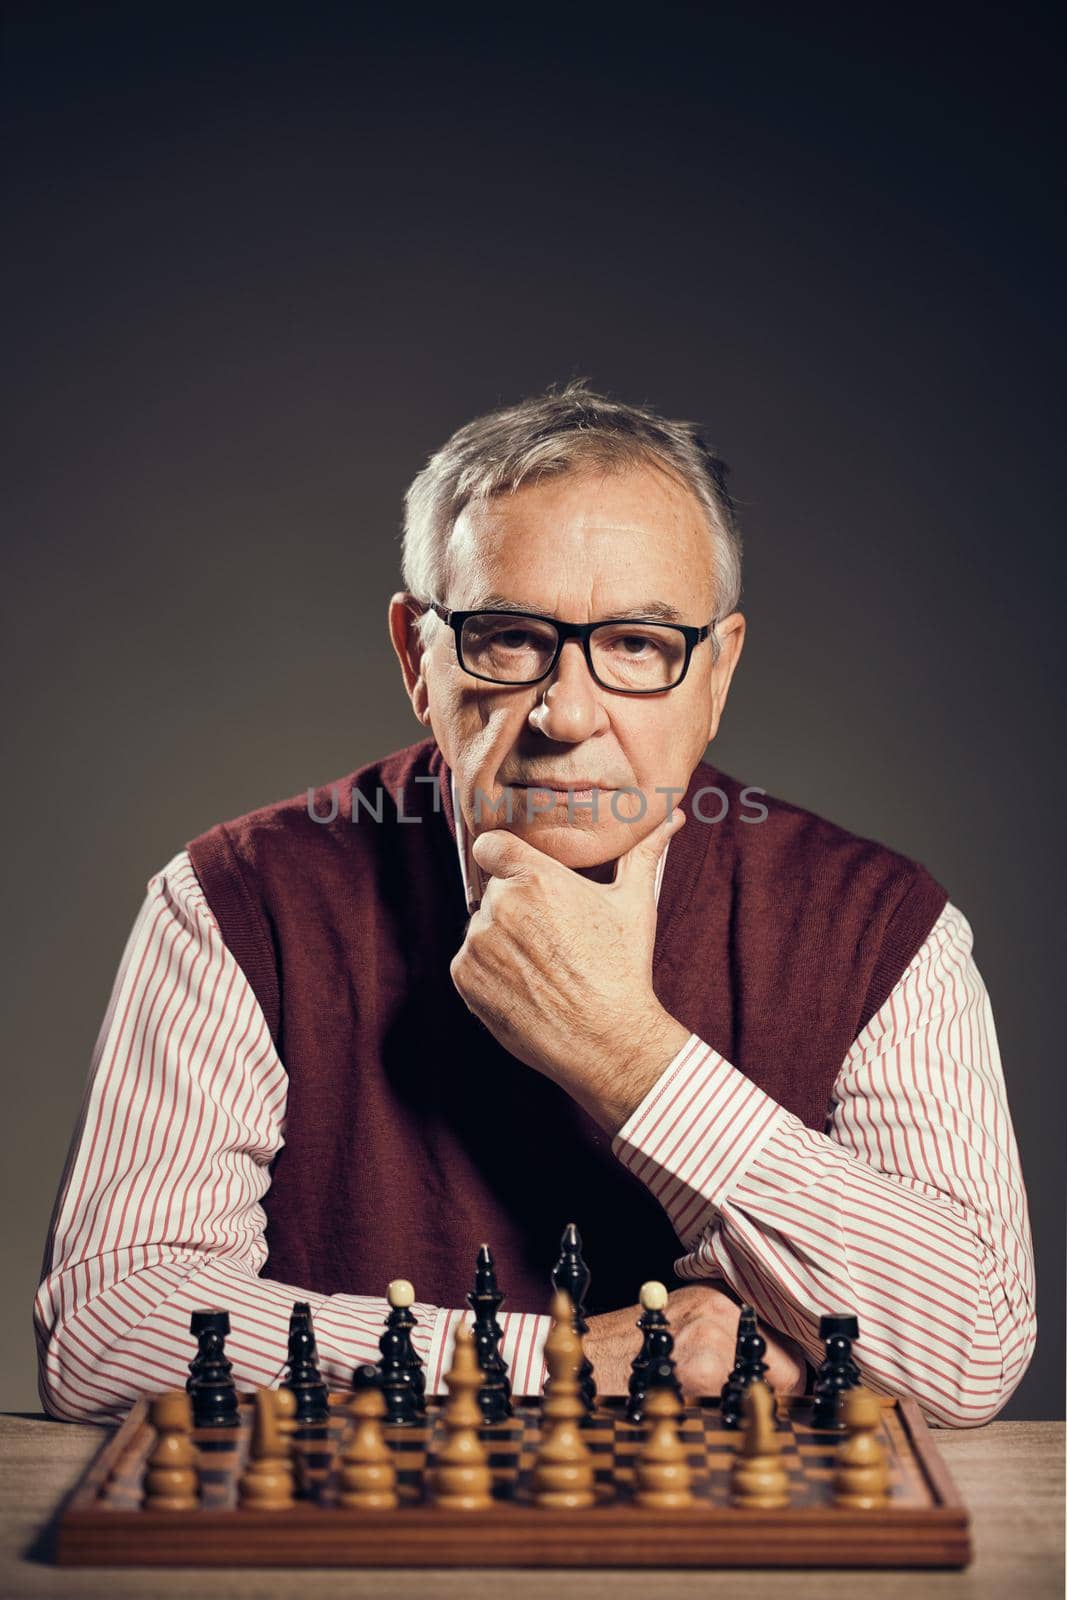 Portrait of senior man who is participating in chess game.